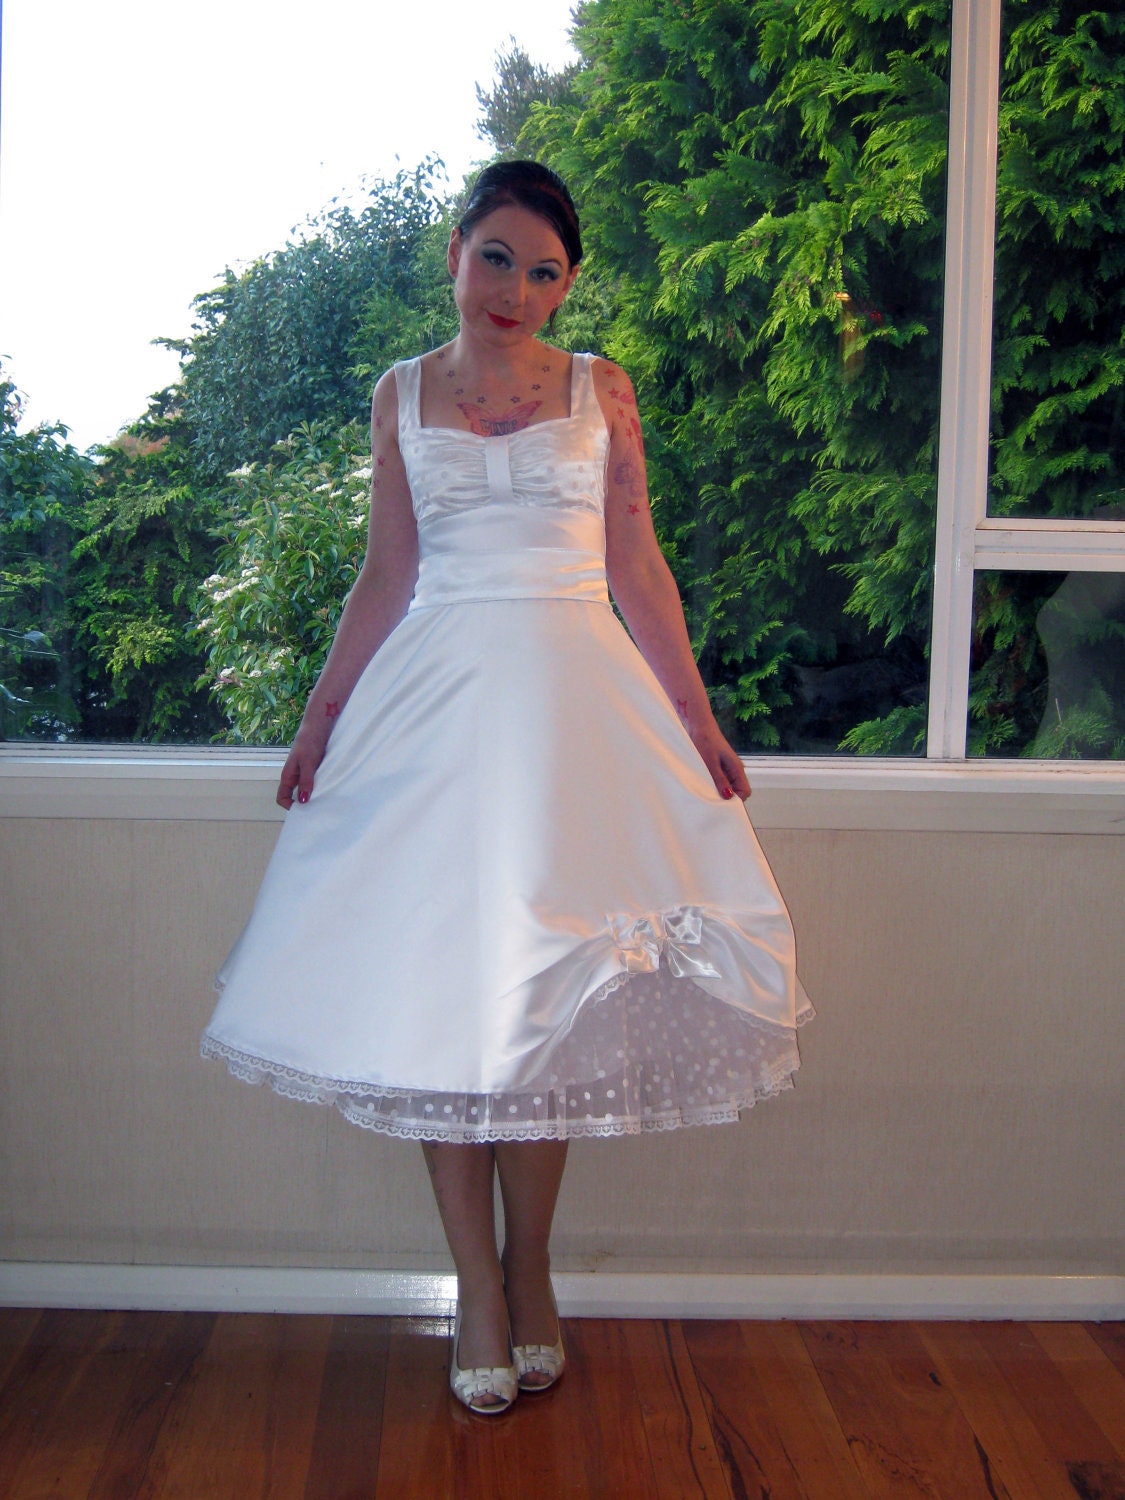 Wedding Dress in Full Skirted 1950s Pin up Rockabilly Style with Polka Dot Petticoat and Sash Tea Length - custom made to fit